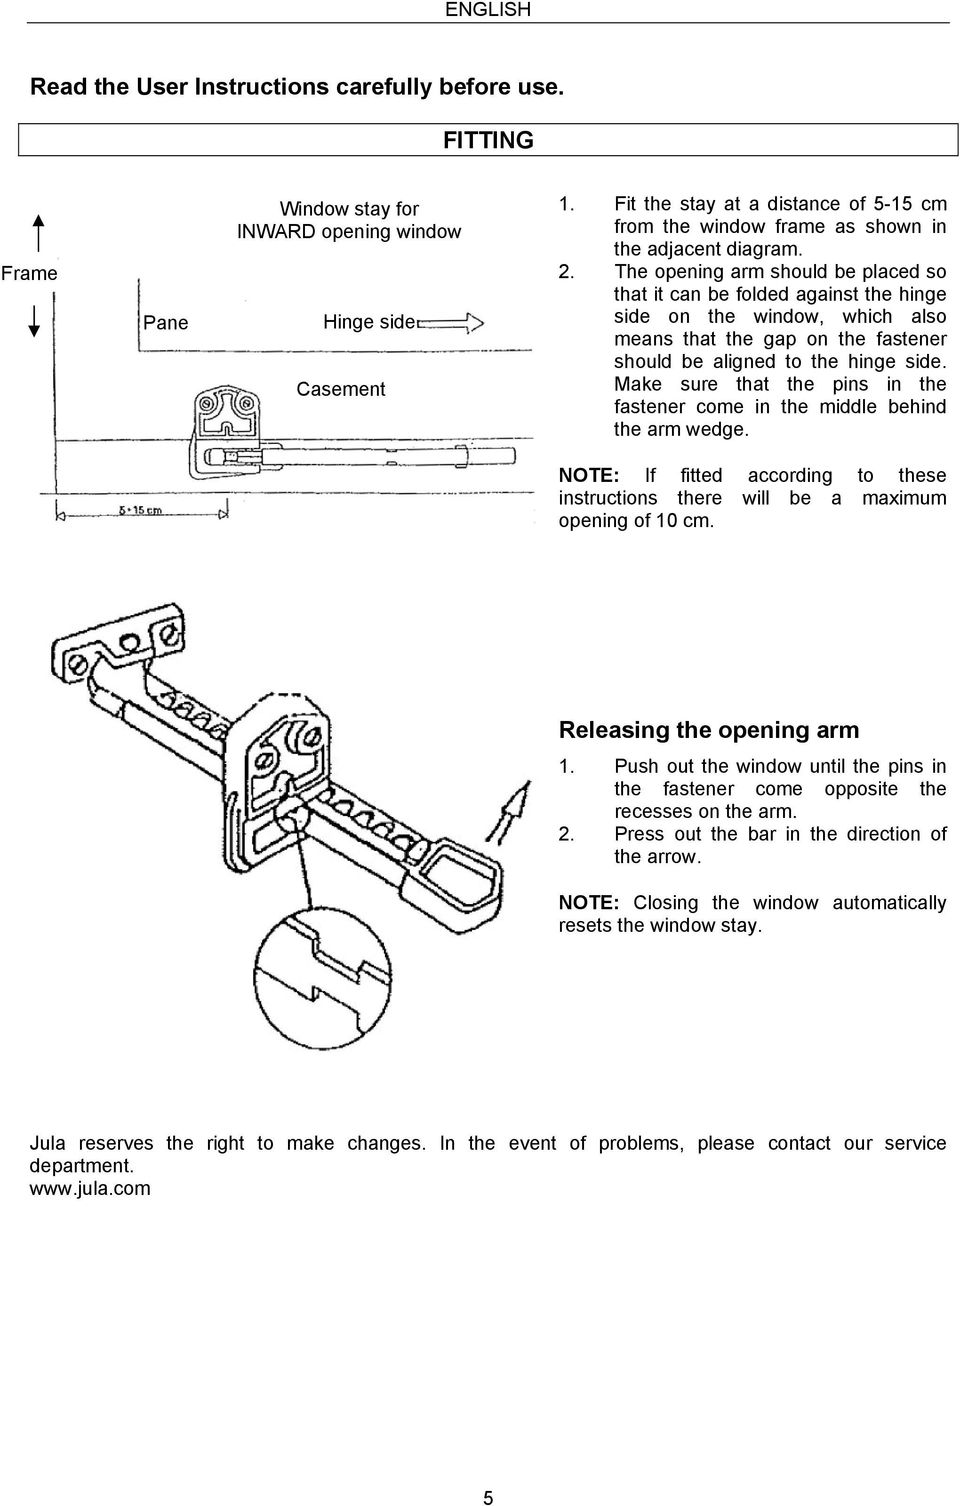 The opening arm should be placed so that it can be folded against the hinge side on the window, which also means that the gap on the fastener should be aligned to the hinge side.